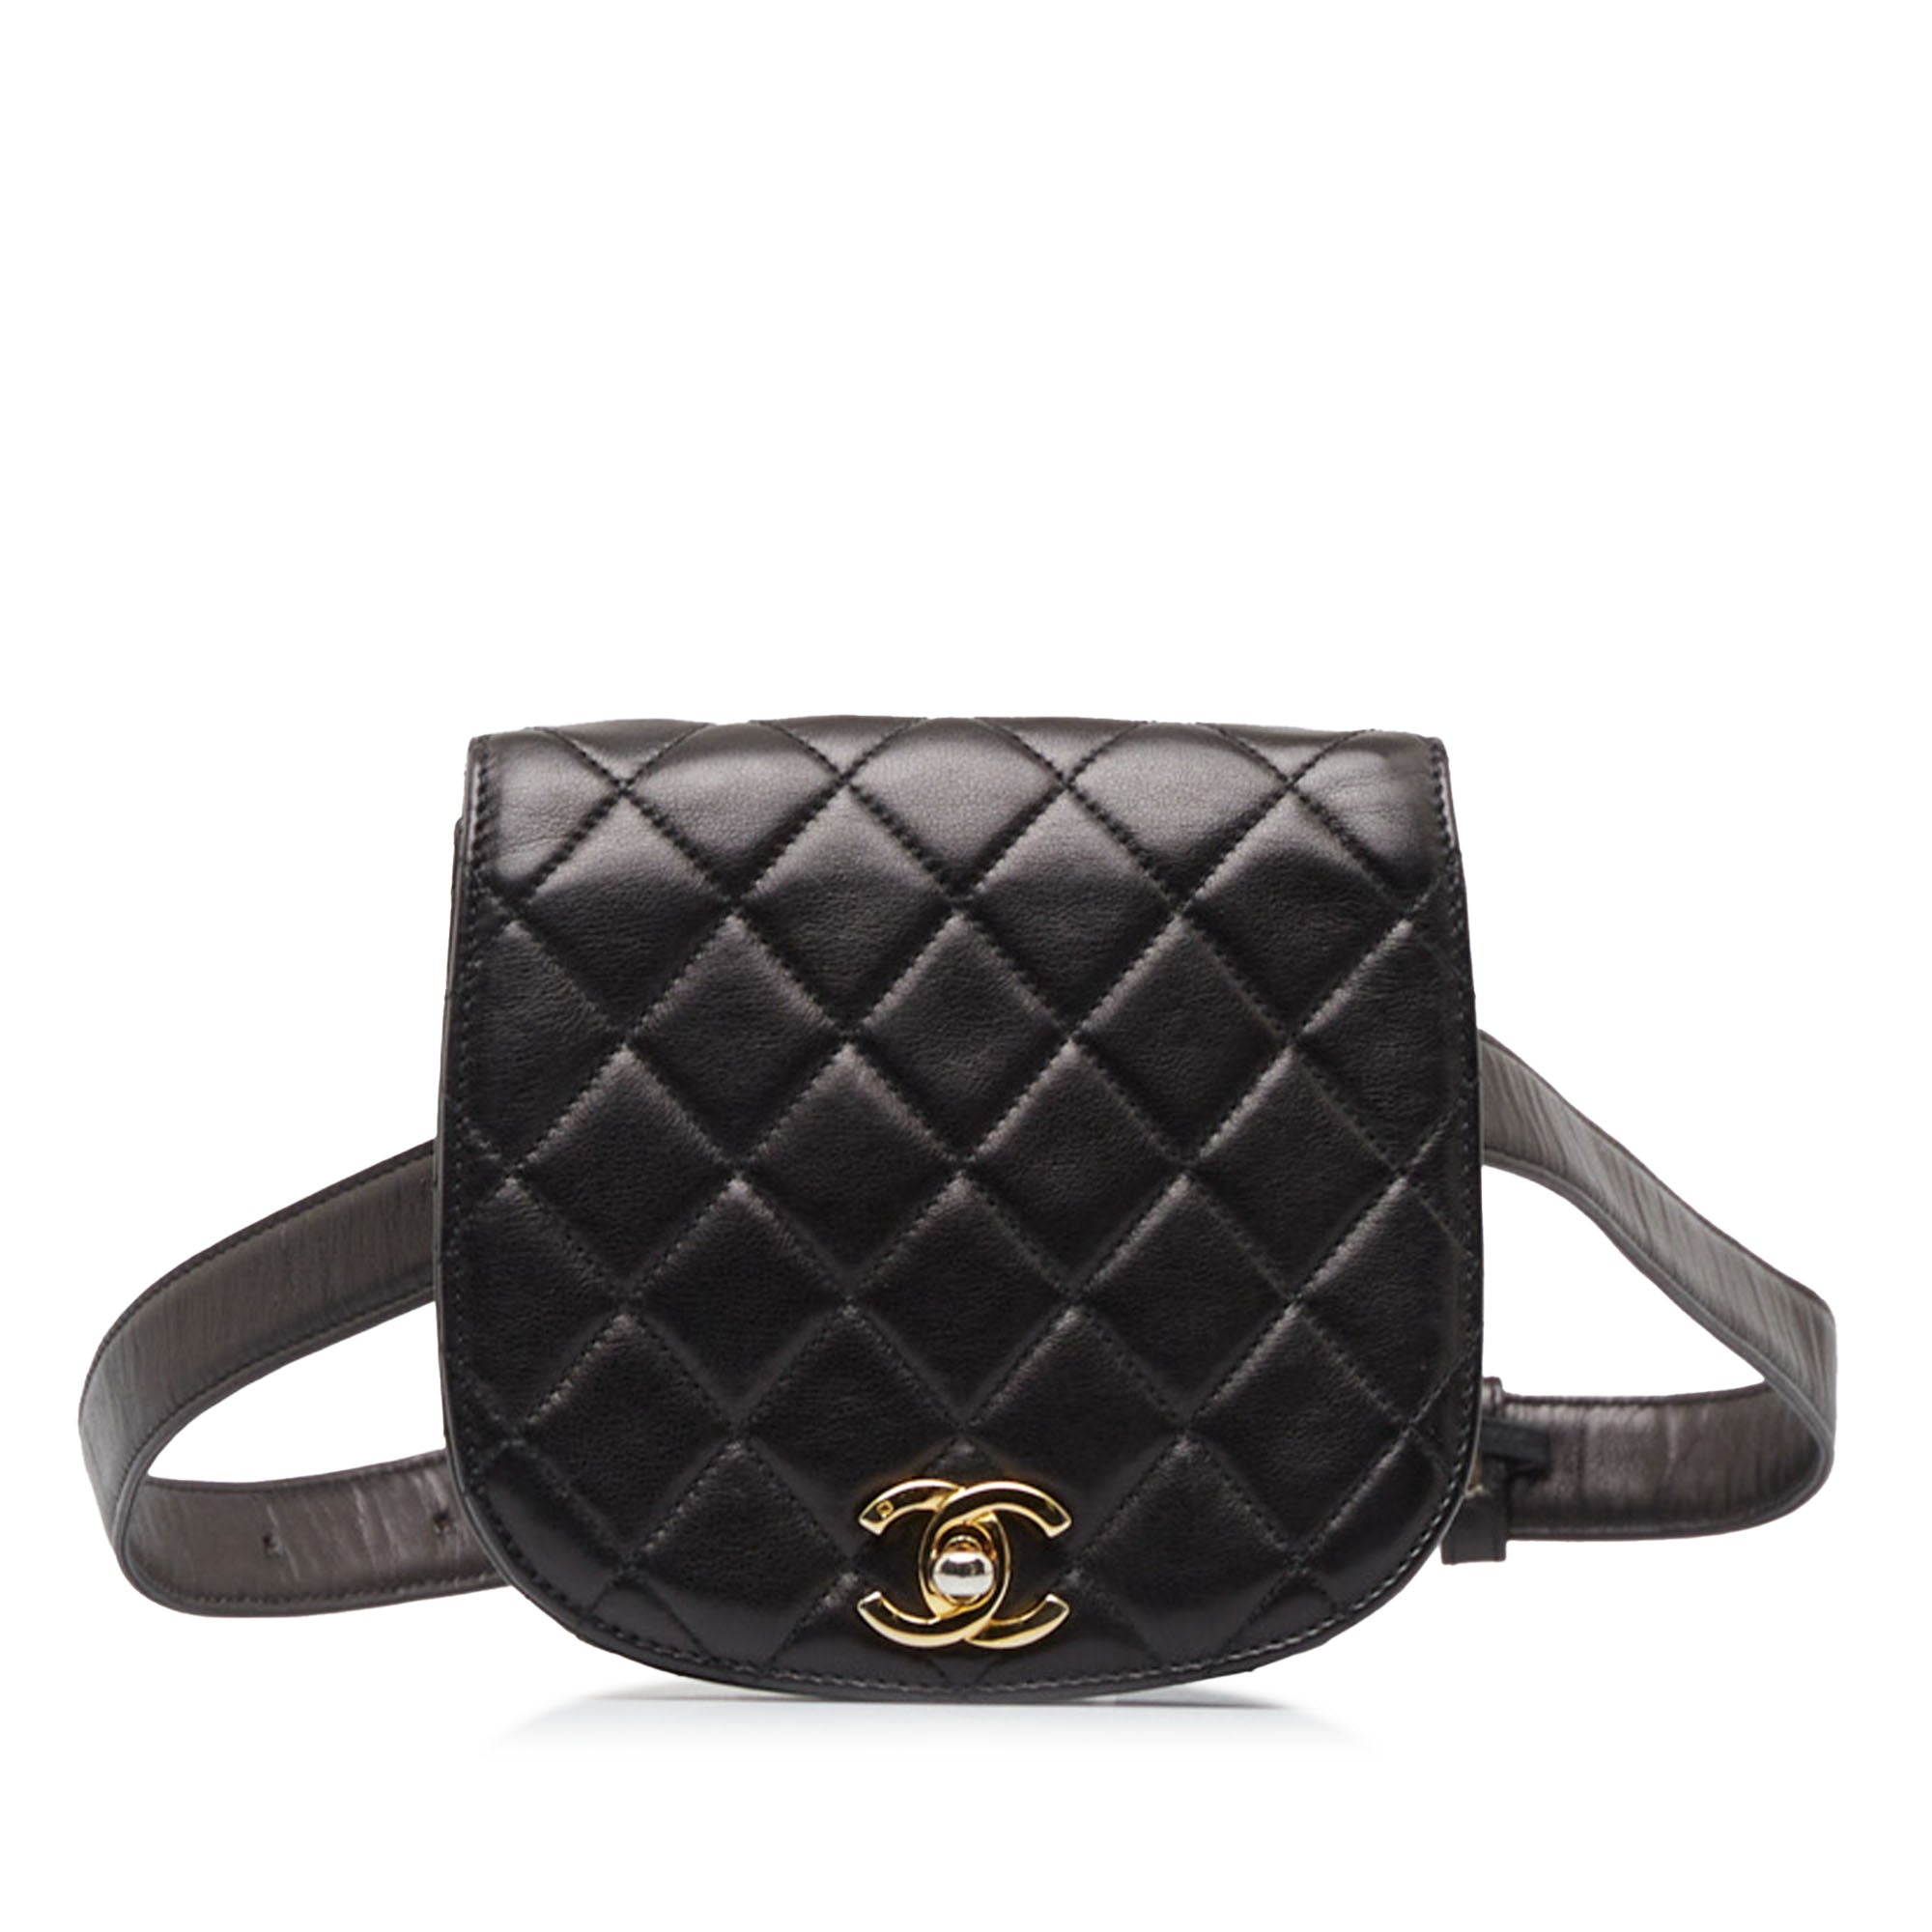 chanel bag clearance